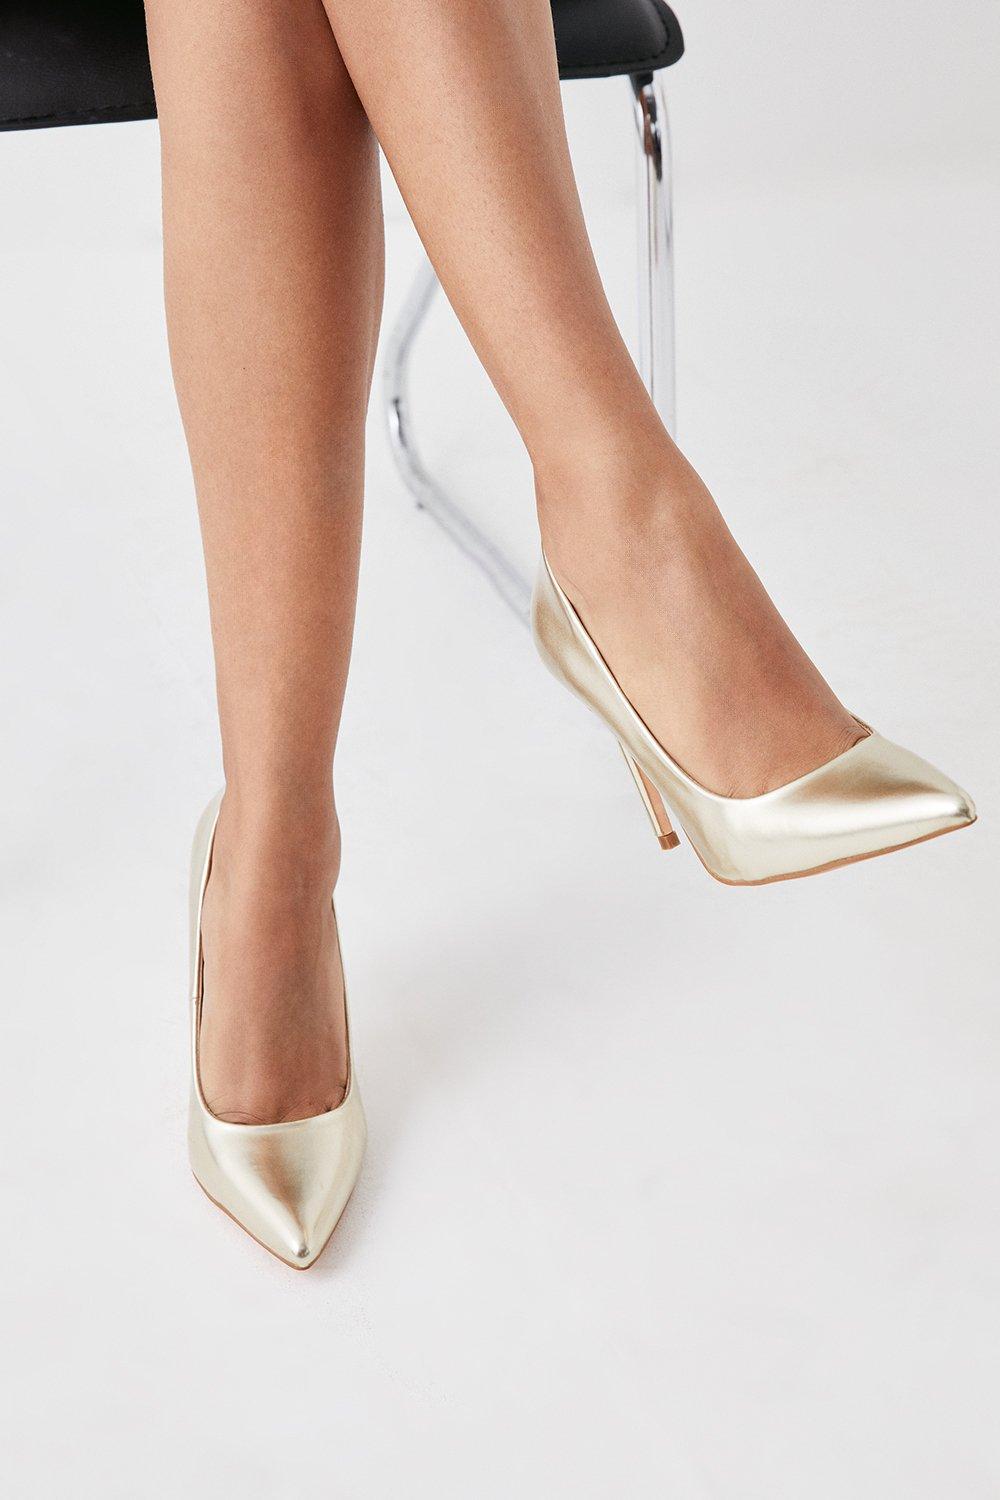 Tate High Heel Stiletto Pointed Court Shoes - Gold